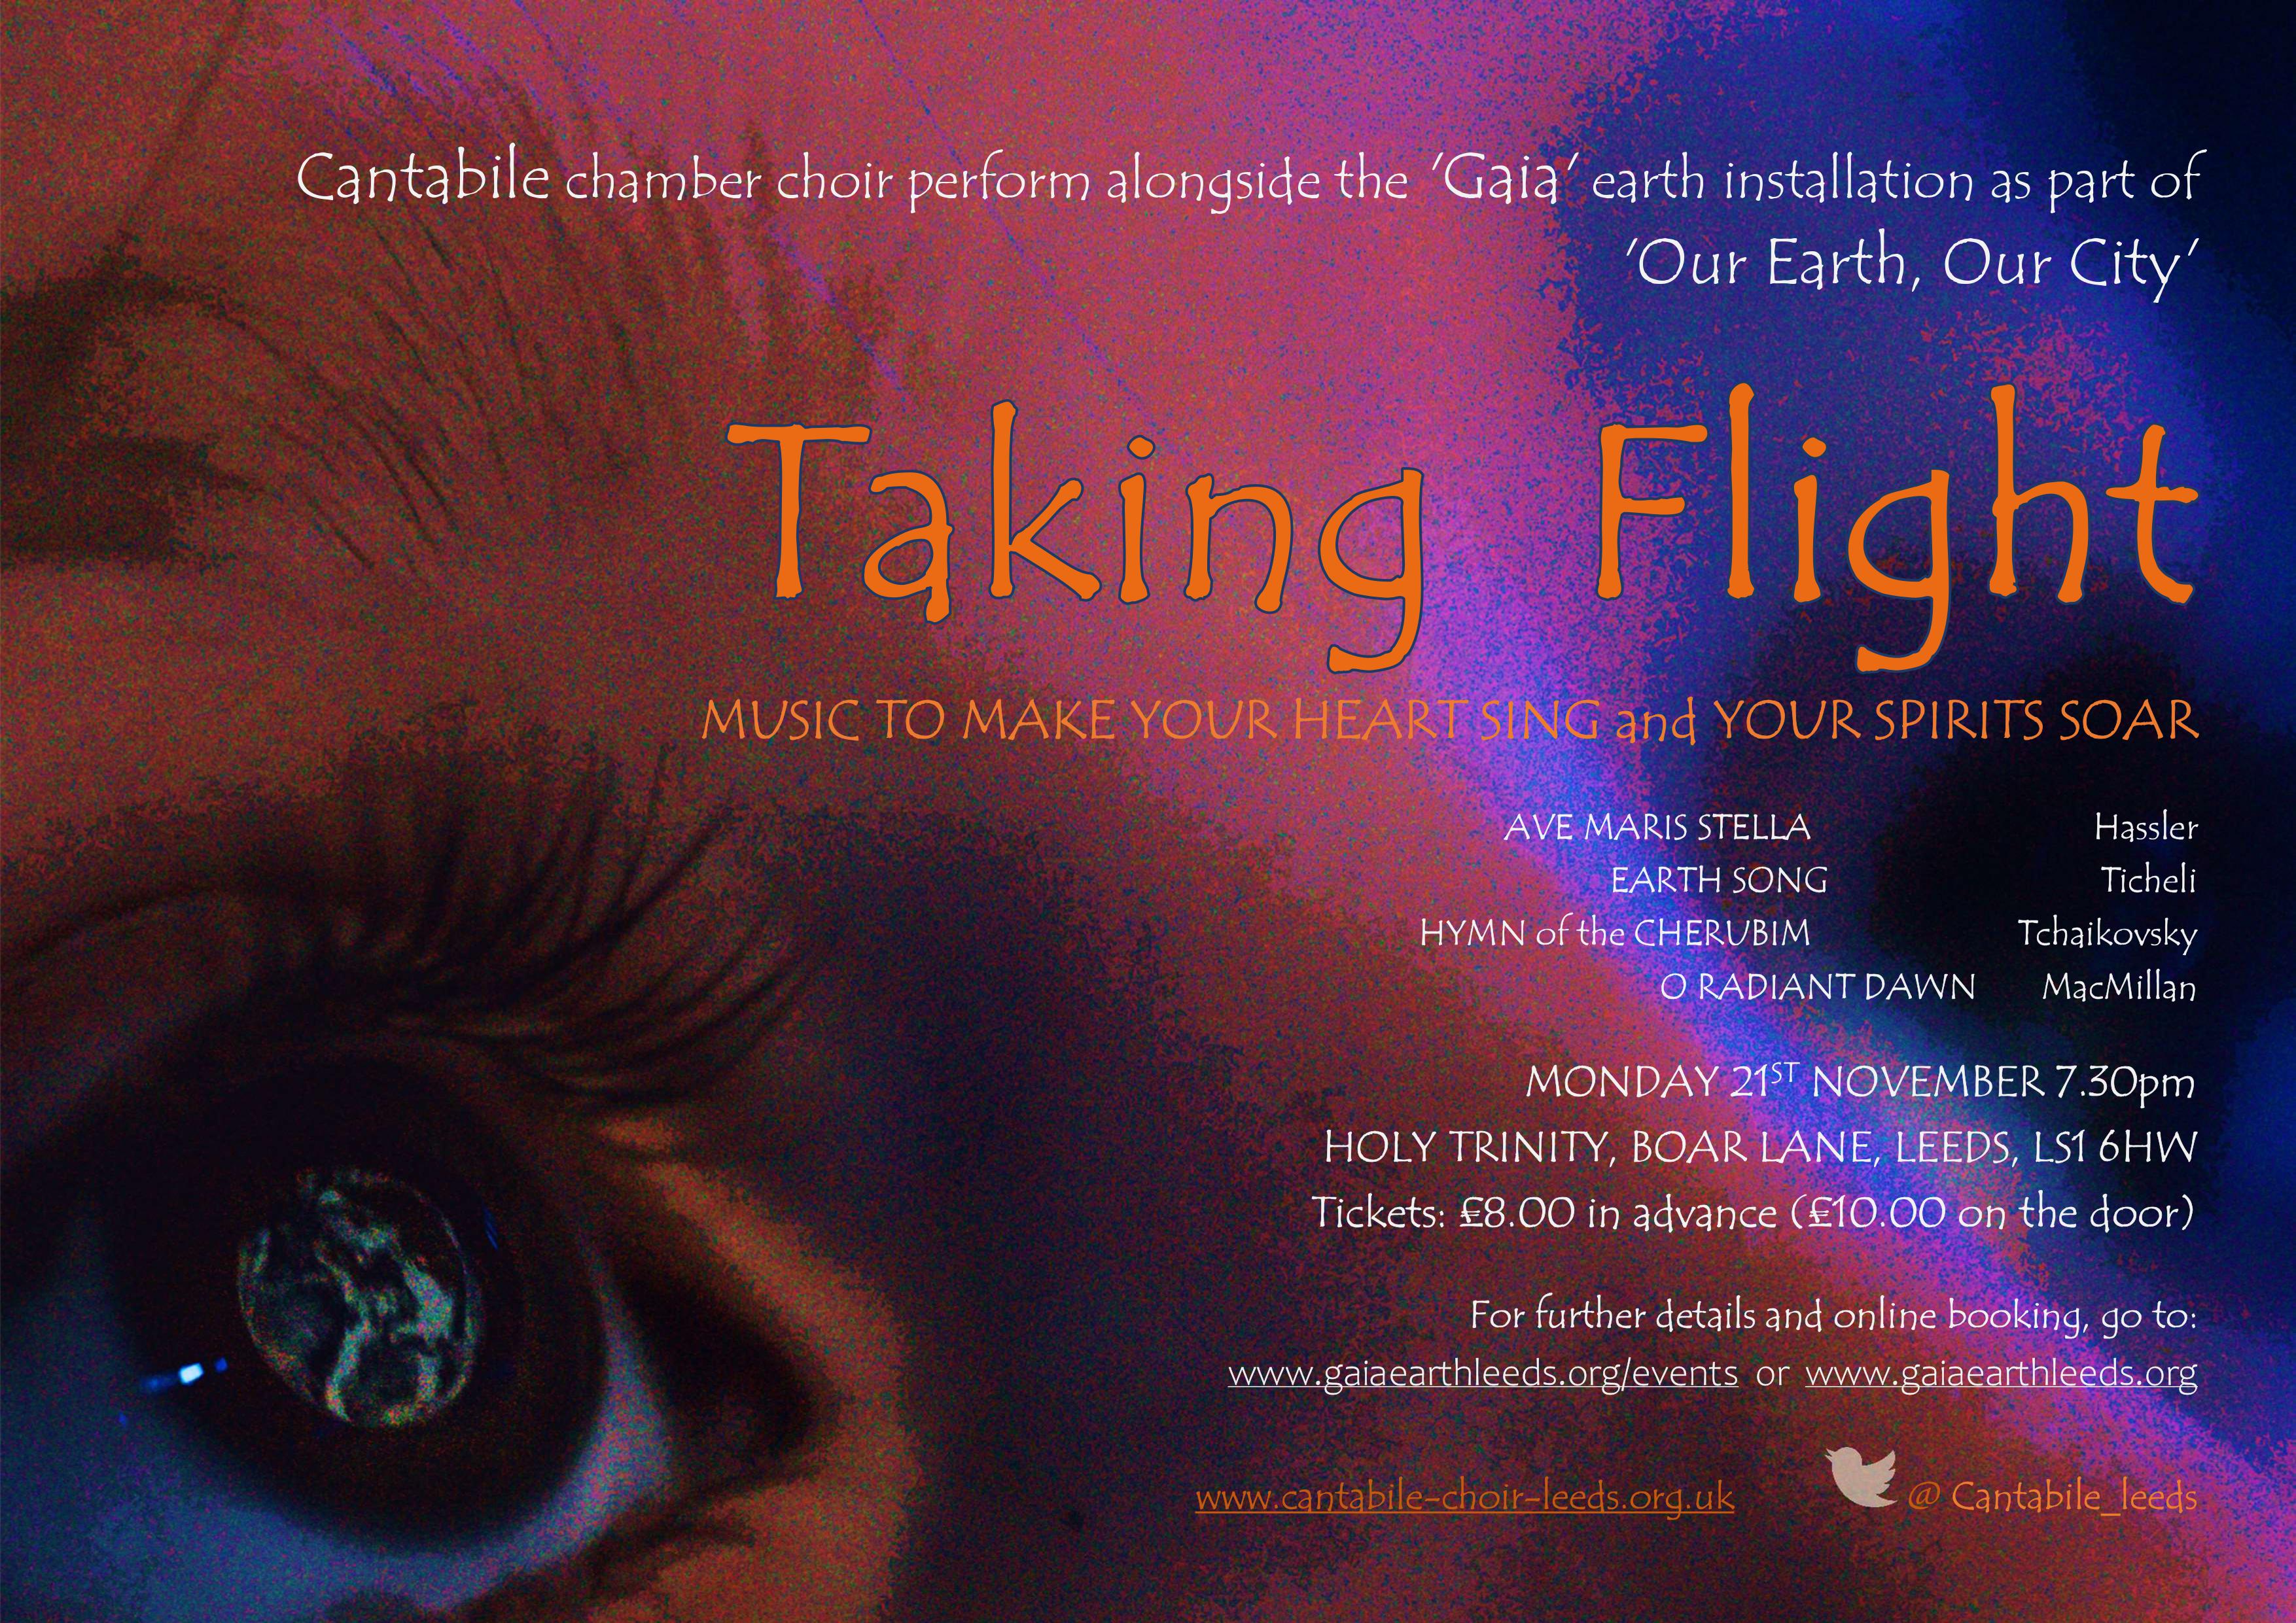 Taking
    Flight flyer Nov 2022, all details in text above, picture is of a
    purplish and red part of a face looking upwards with focus on the eye